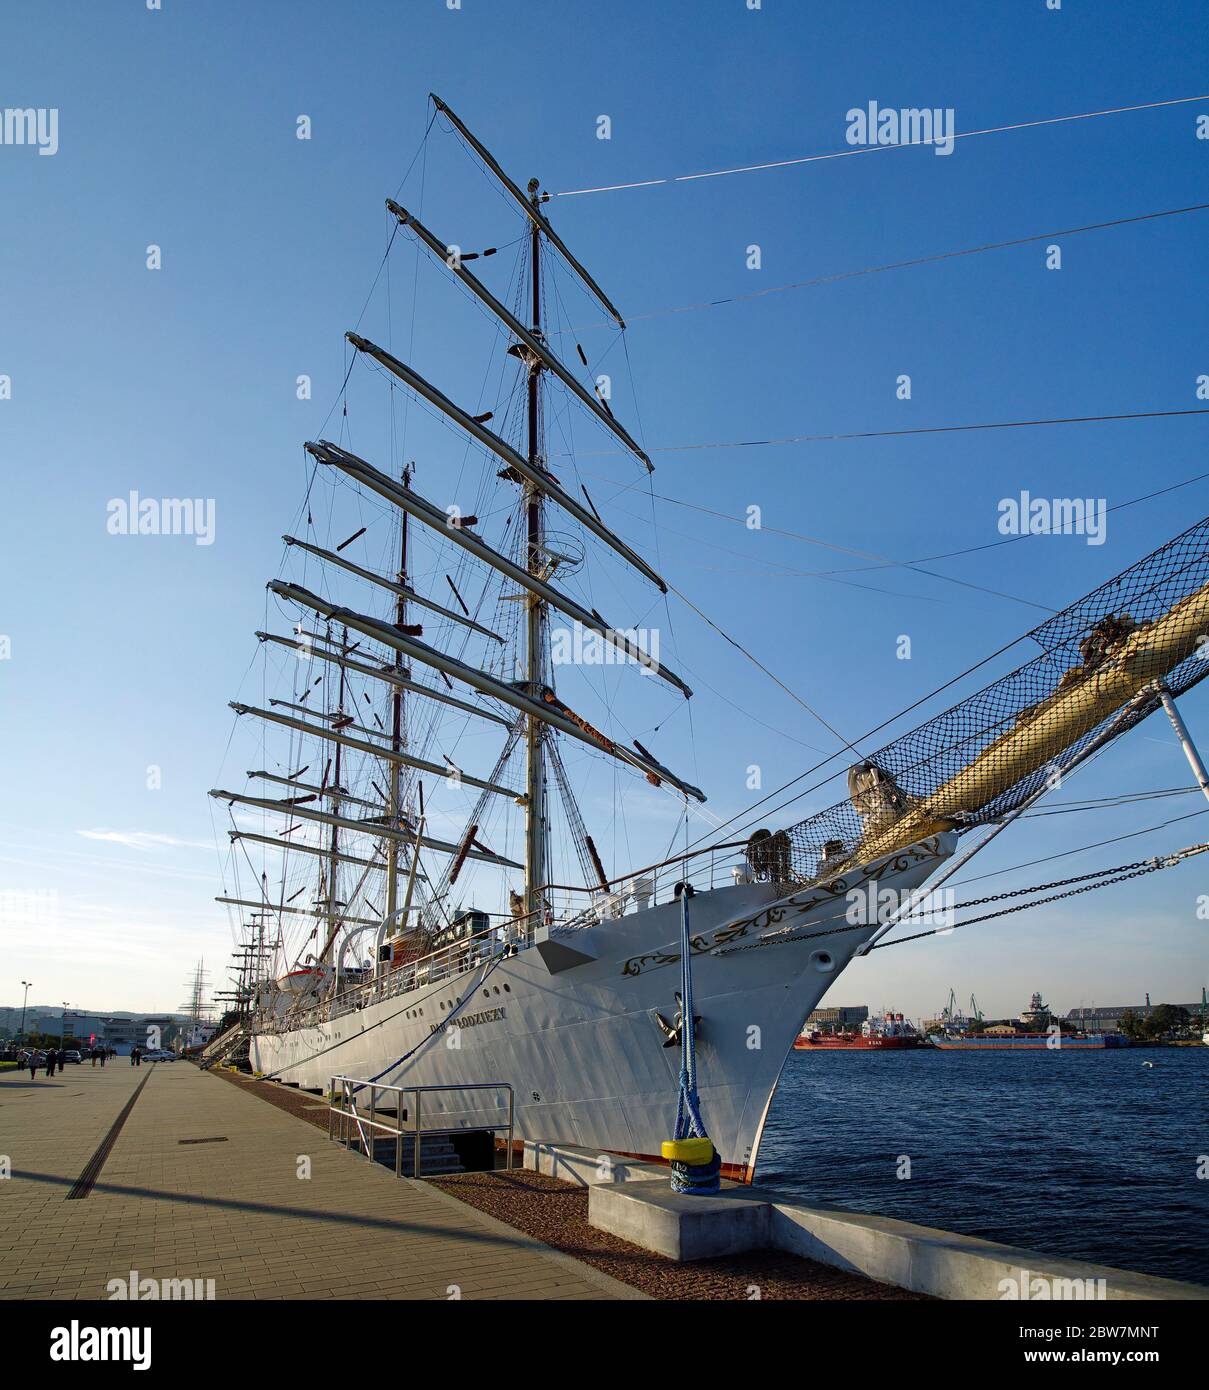 GDYNIA, POLAND: SEPTEMBER 29, 2017: STS Gift of the Youth (Dar Mlodziezy) - three-masted Polish training frigate type B-95 in Gdynia port over Baltic Stock Photo